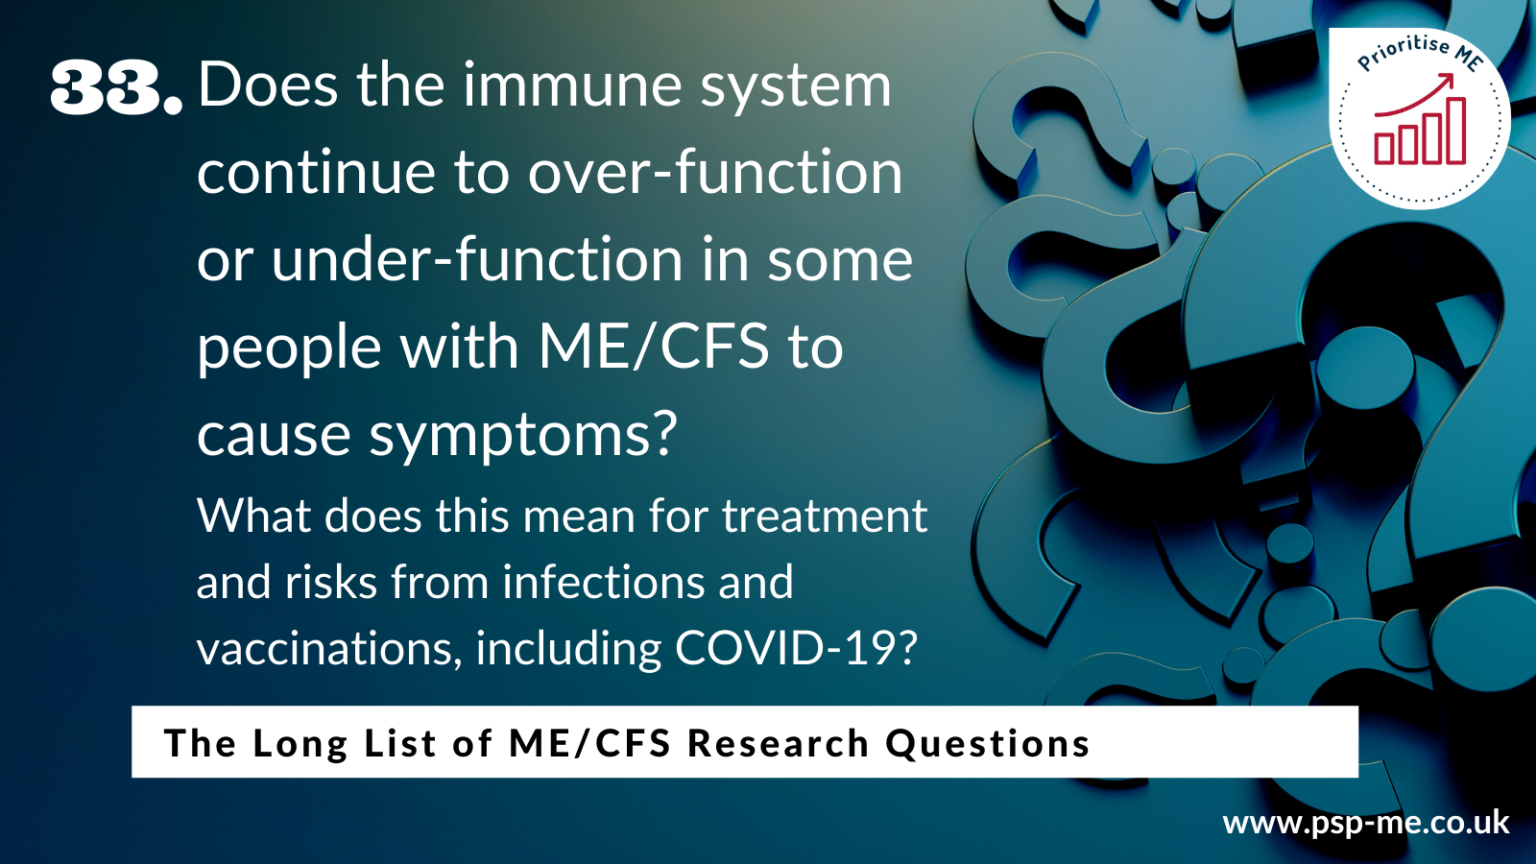 The Long List of ME_CFS Research Questions (33)